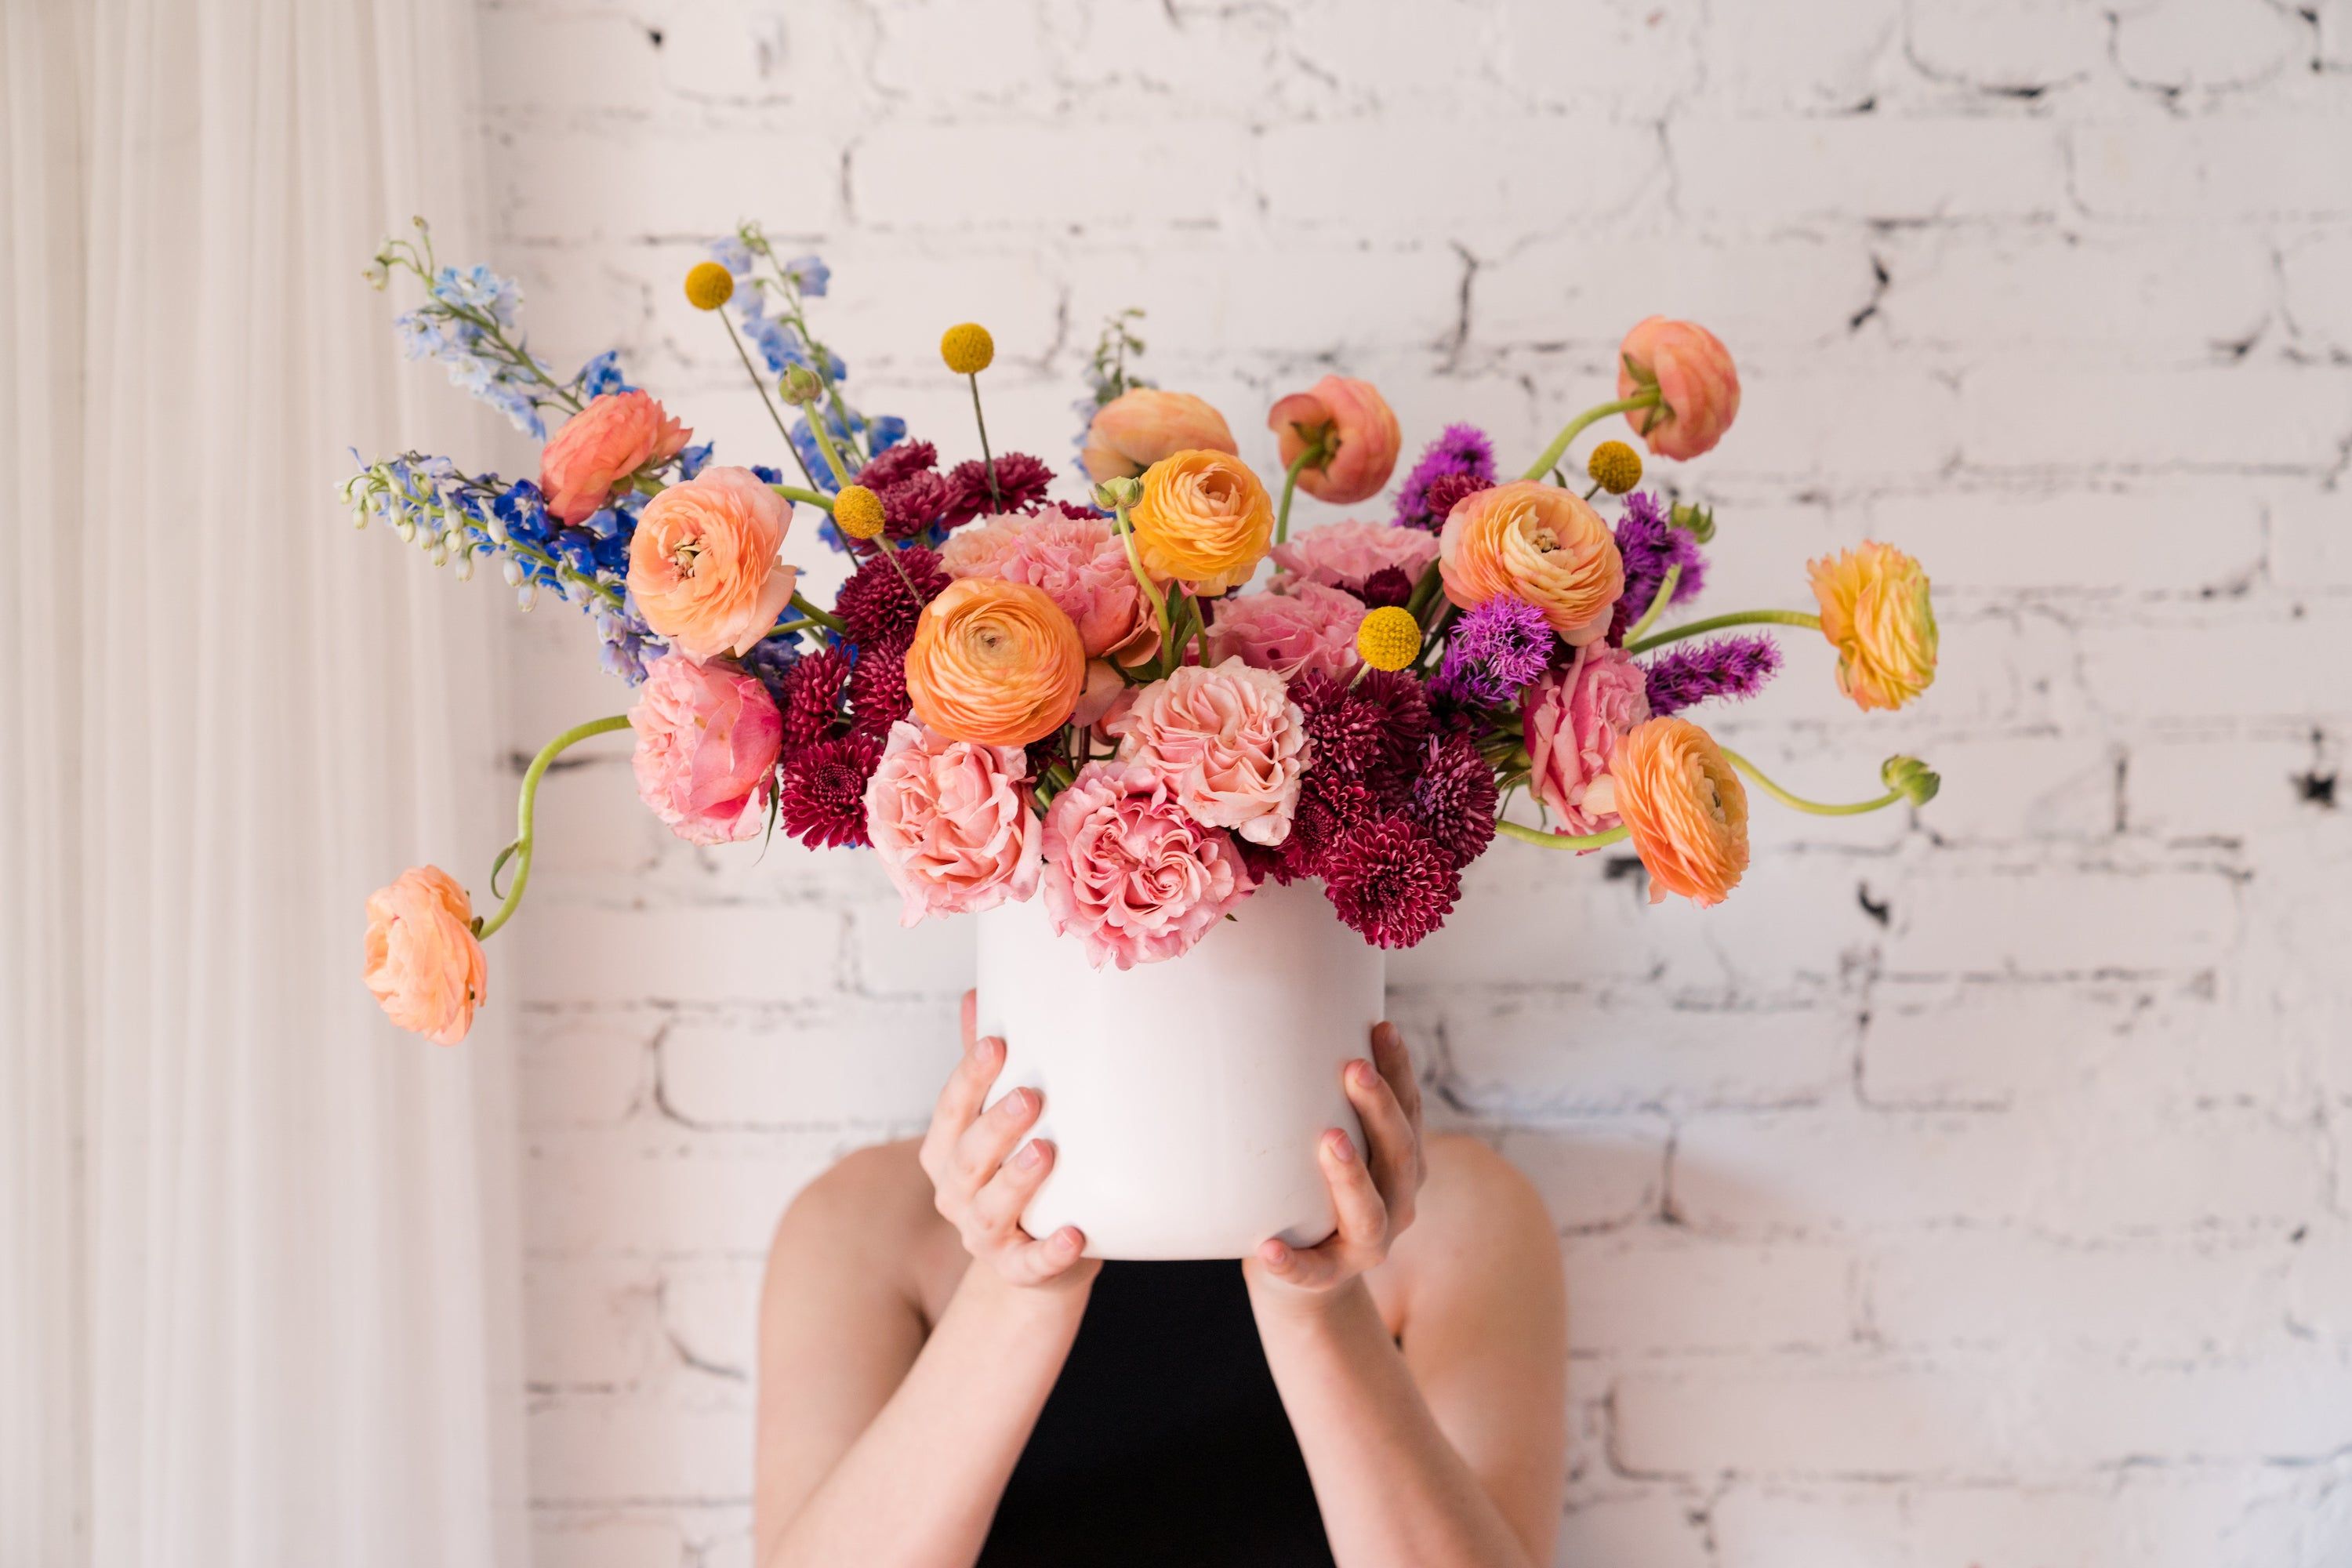 Tricks for Extending the Life of Cut Flowers